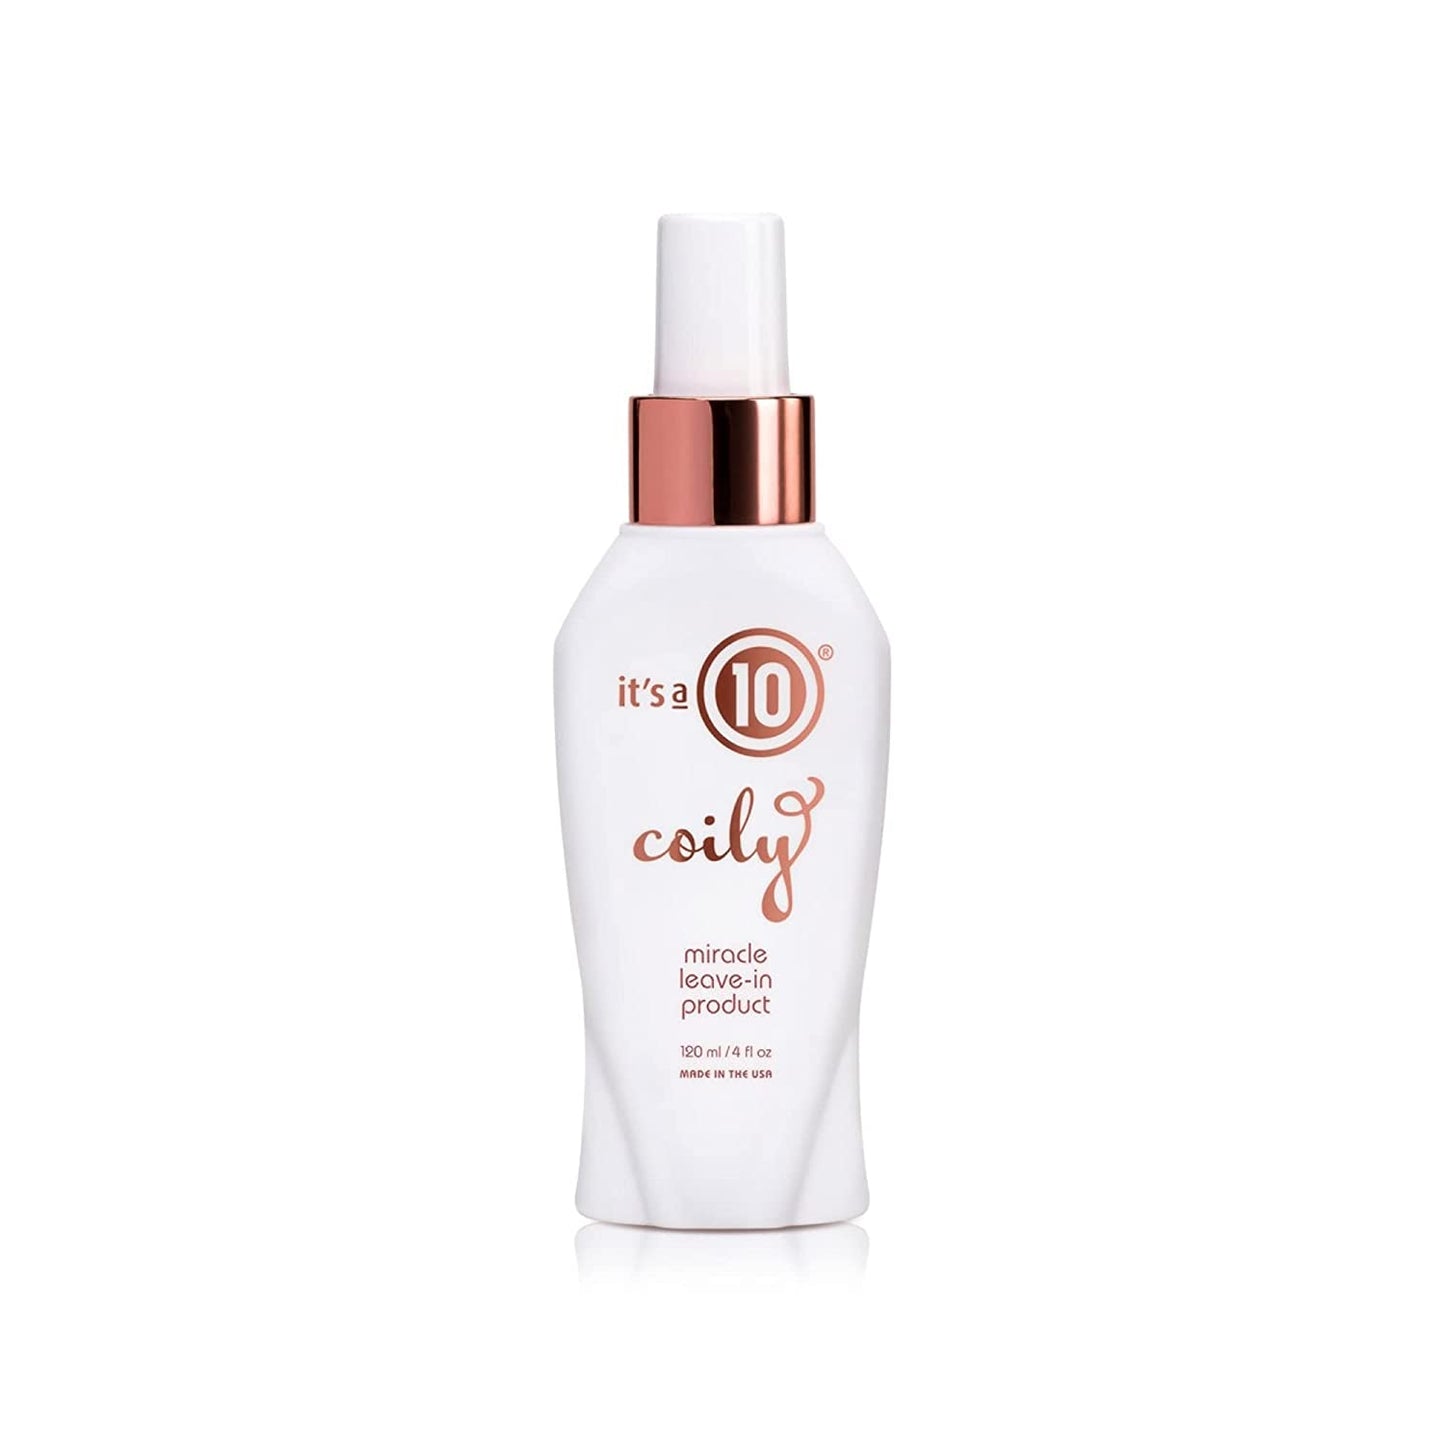 It’s A 10 Coily Miracle Leave-In Product 4 oz